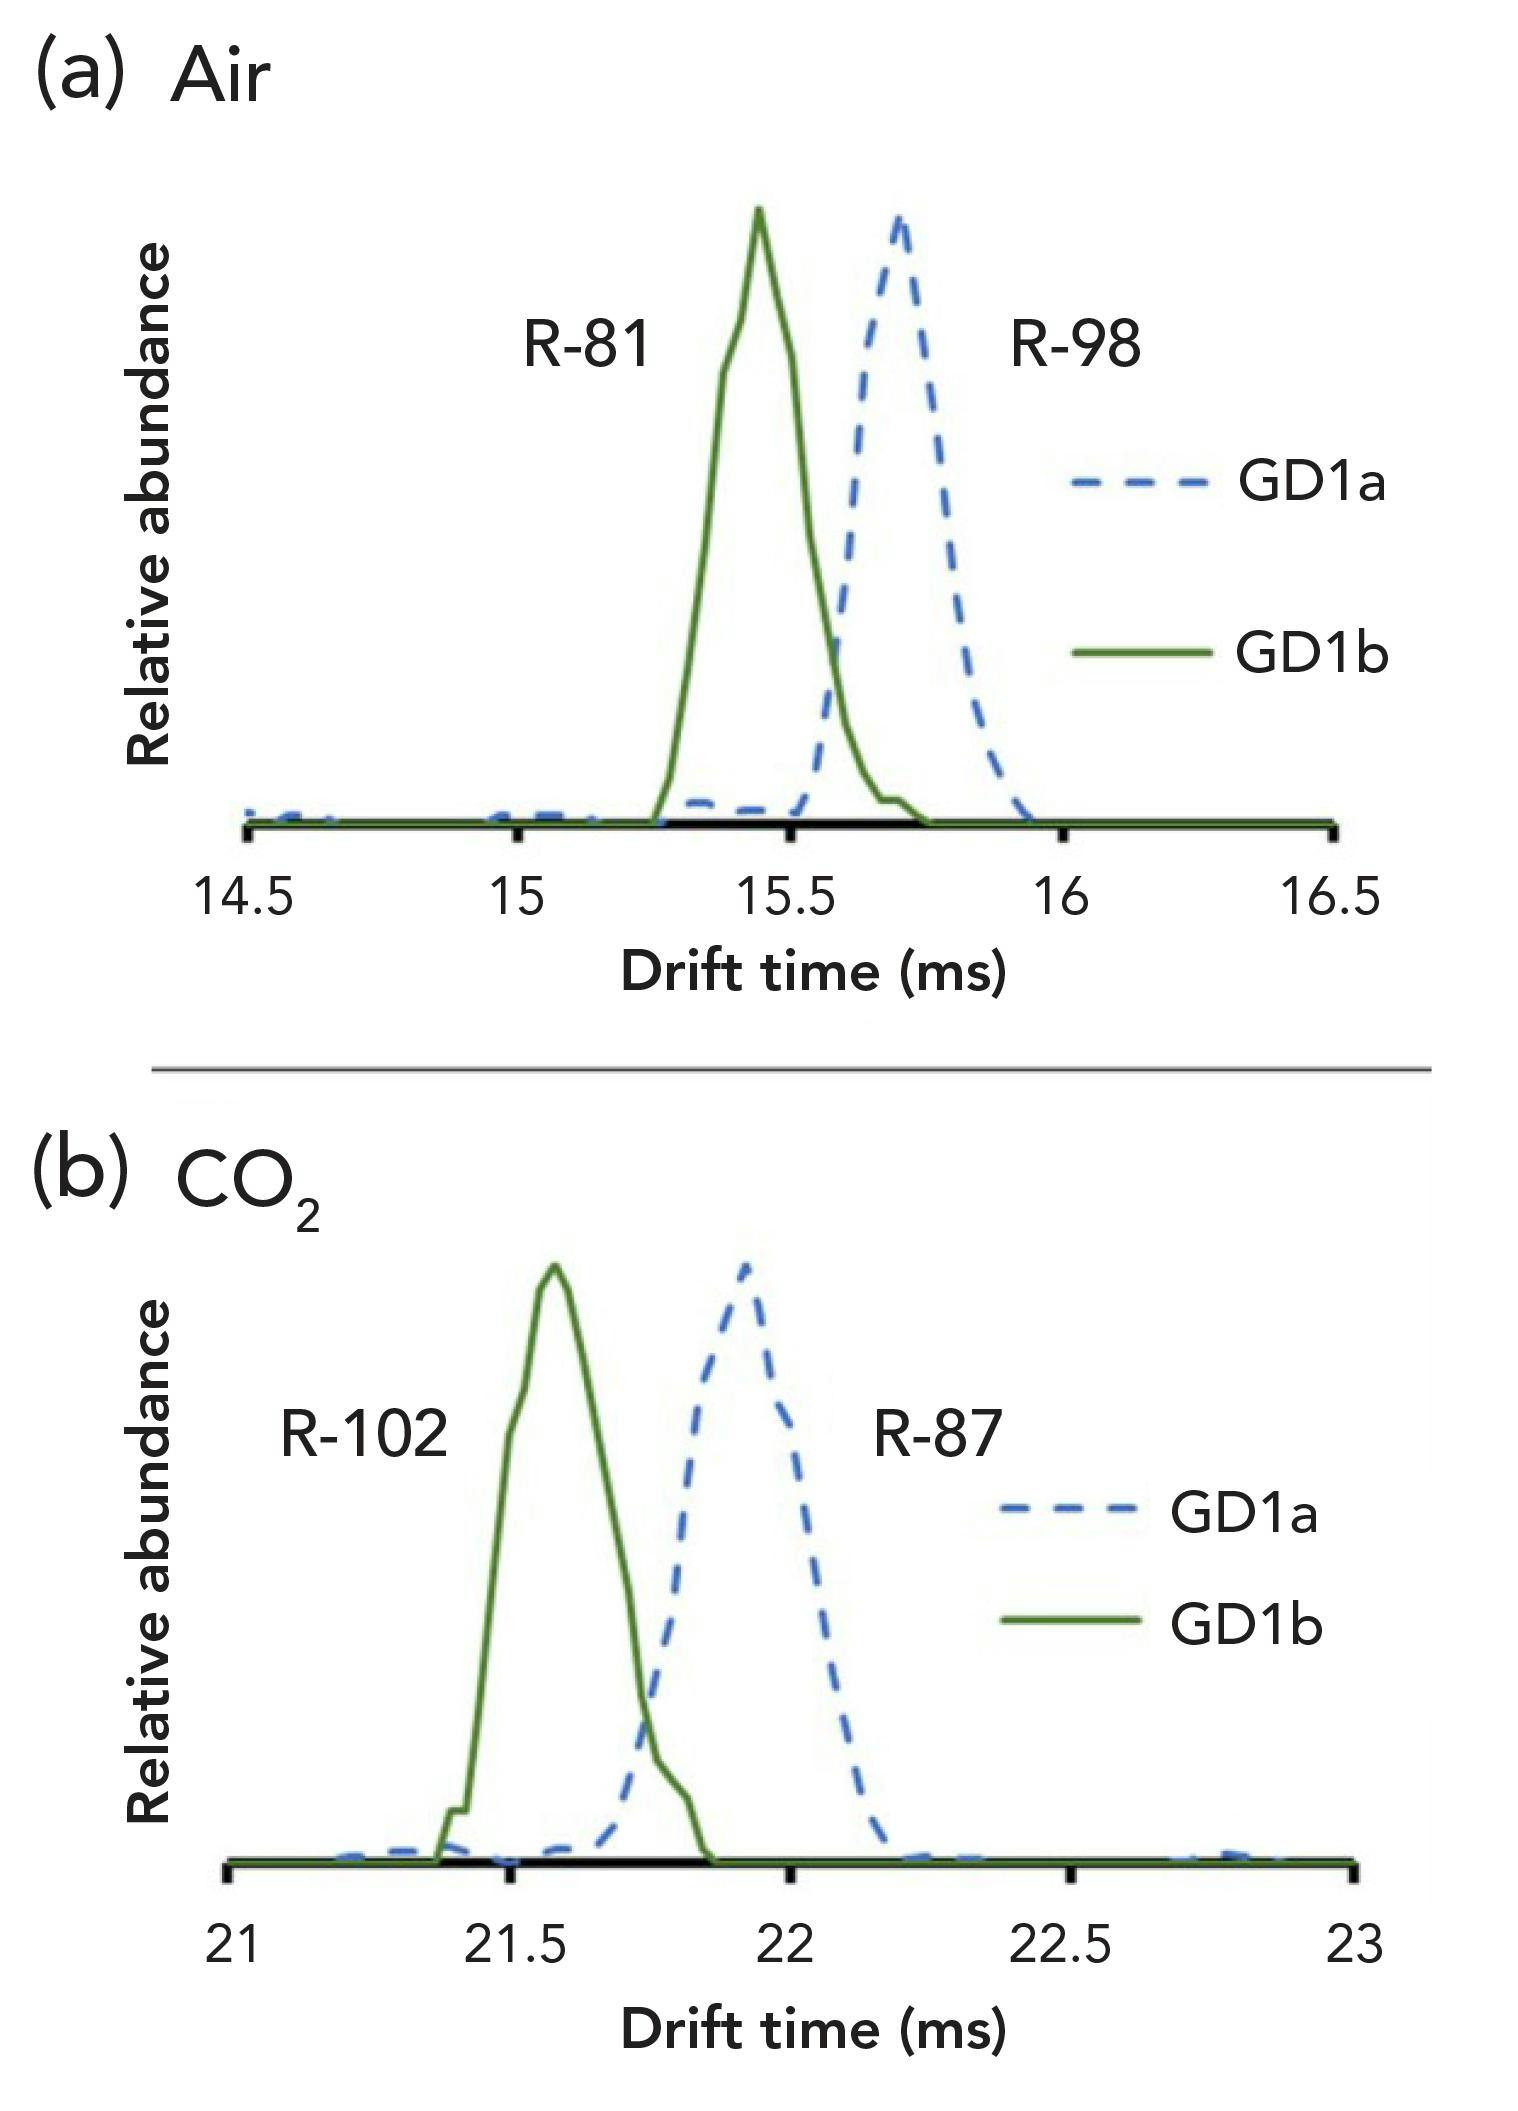 Figure 4: Separation and resolving power for the ganglioside isomer pair (917.478 m/z) in (a) 100% air and (b) 100% CO2, showing similar performance in both drift gases. No other metabolite pairs experienced any significant separation in air as a drift gas.